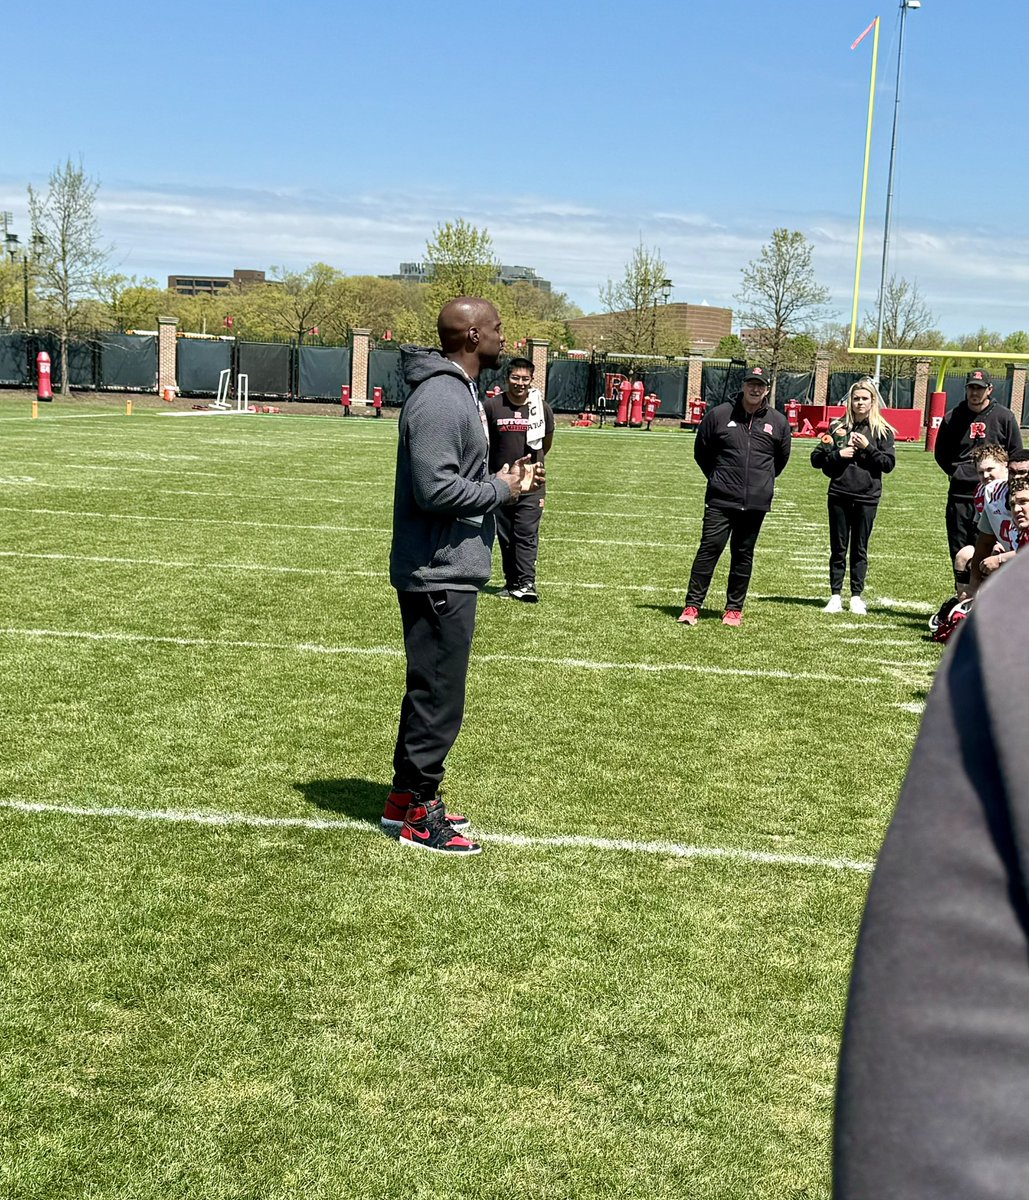 It was an honor having Rutgers legend and 3x Super Bowl Champion Duron Harmon back at practice today! @dharm32 | #NFLKnights